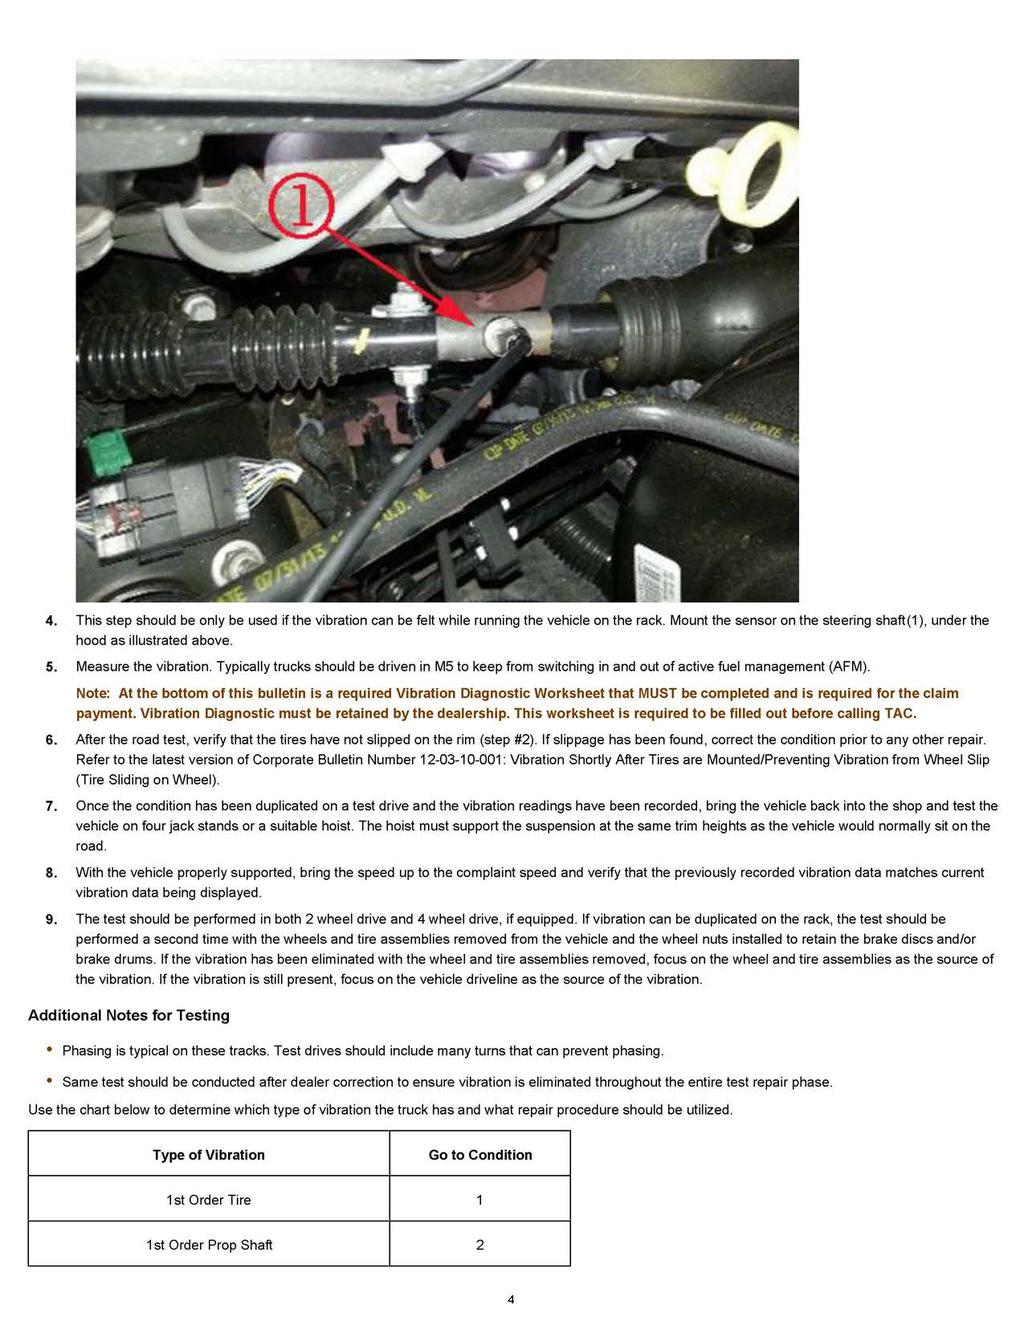 4. This step should be only be used if the vibration can be felt while running the vehicle on the rack. Mount the sensor on the steering shaft(1 ), under the hood as illustrated above. 5.